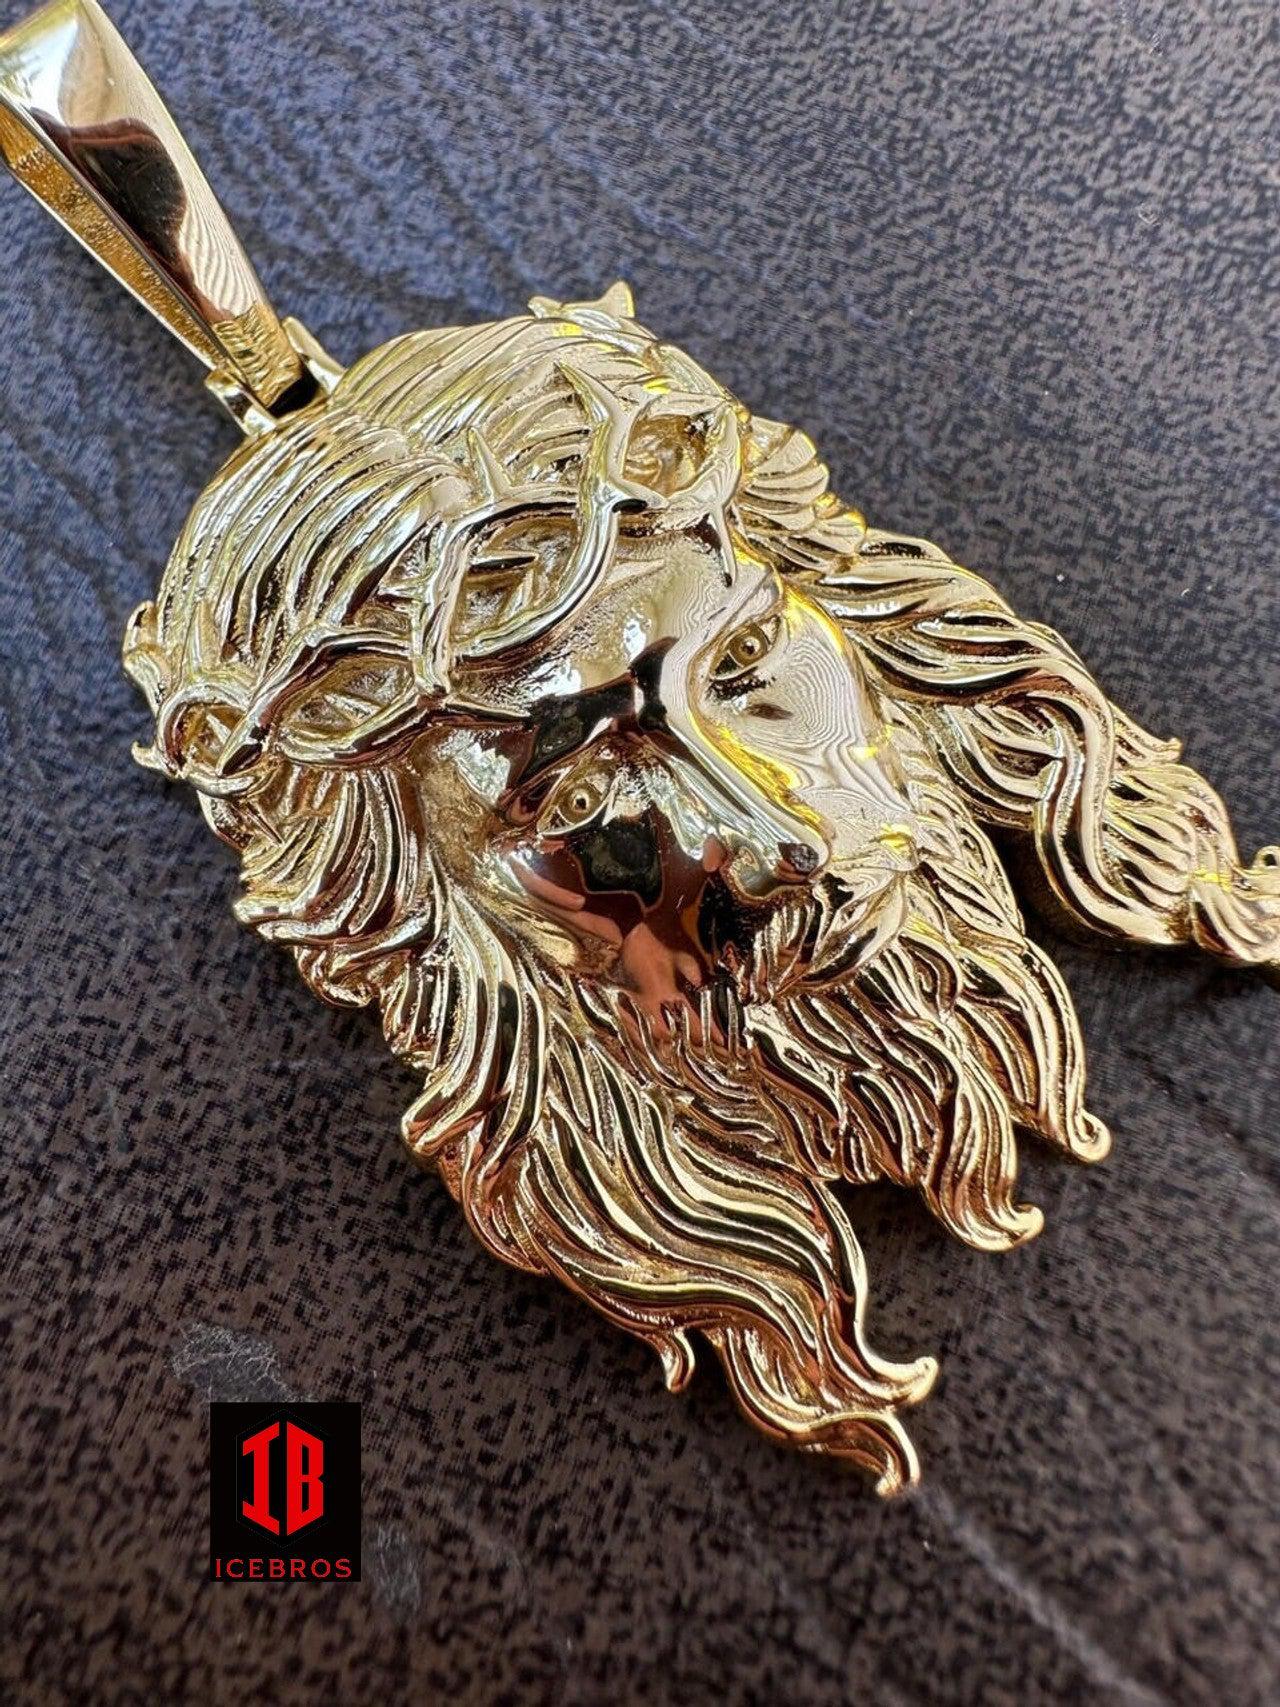 Glossy Rose Gold Over 925 ITALY Silver Jesus Piece Iced Pendant Chain - 3 Sizes